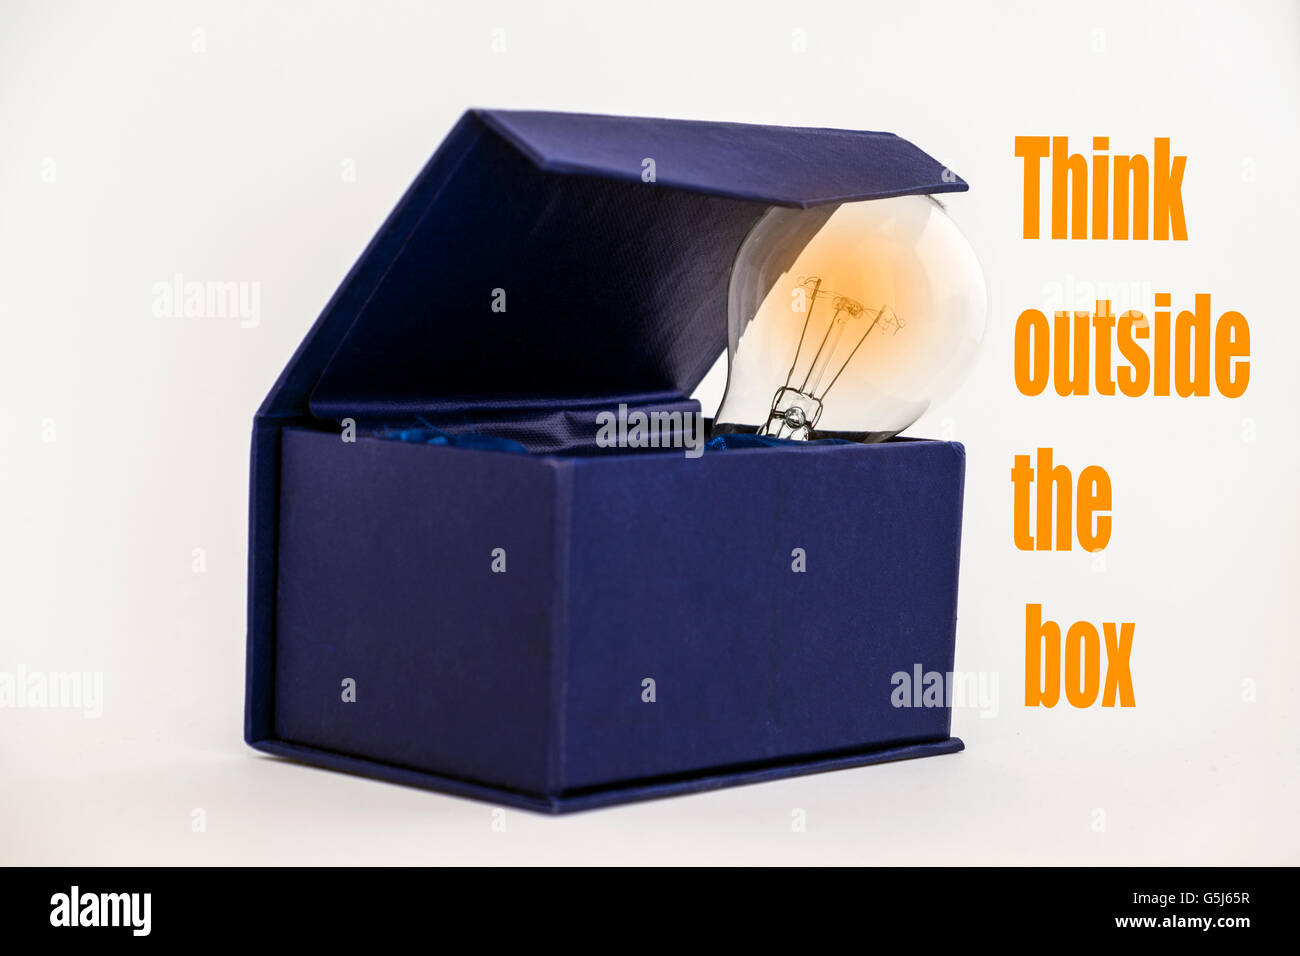 Blue box on white background with Think outside the box text Stock Photo